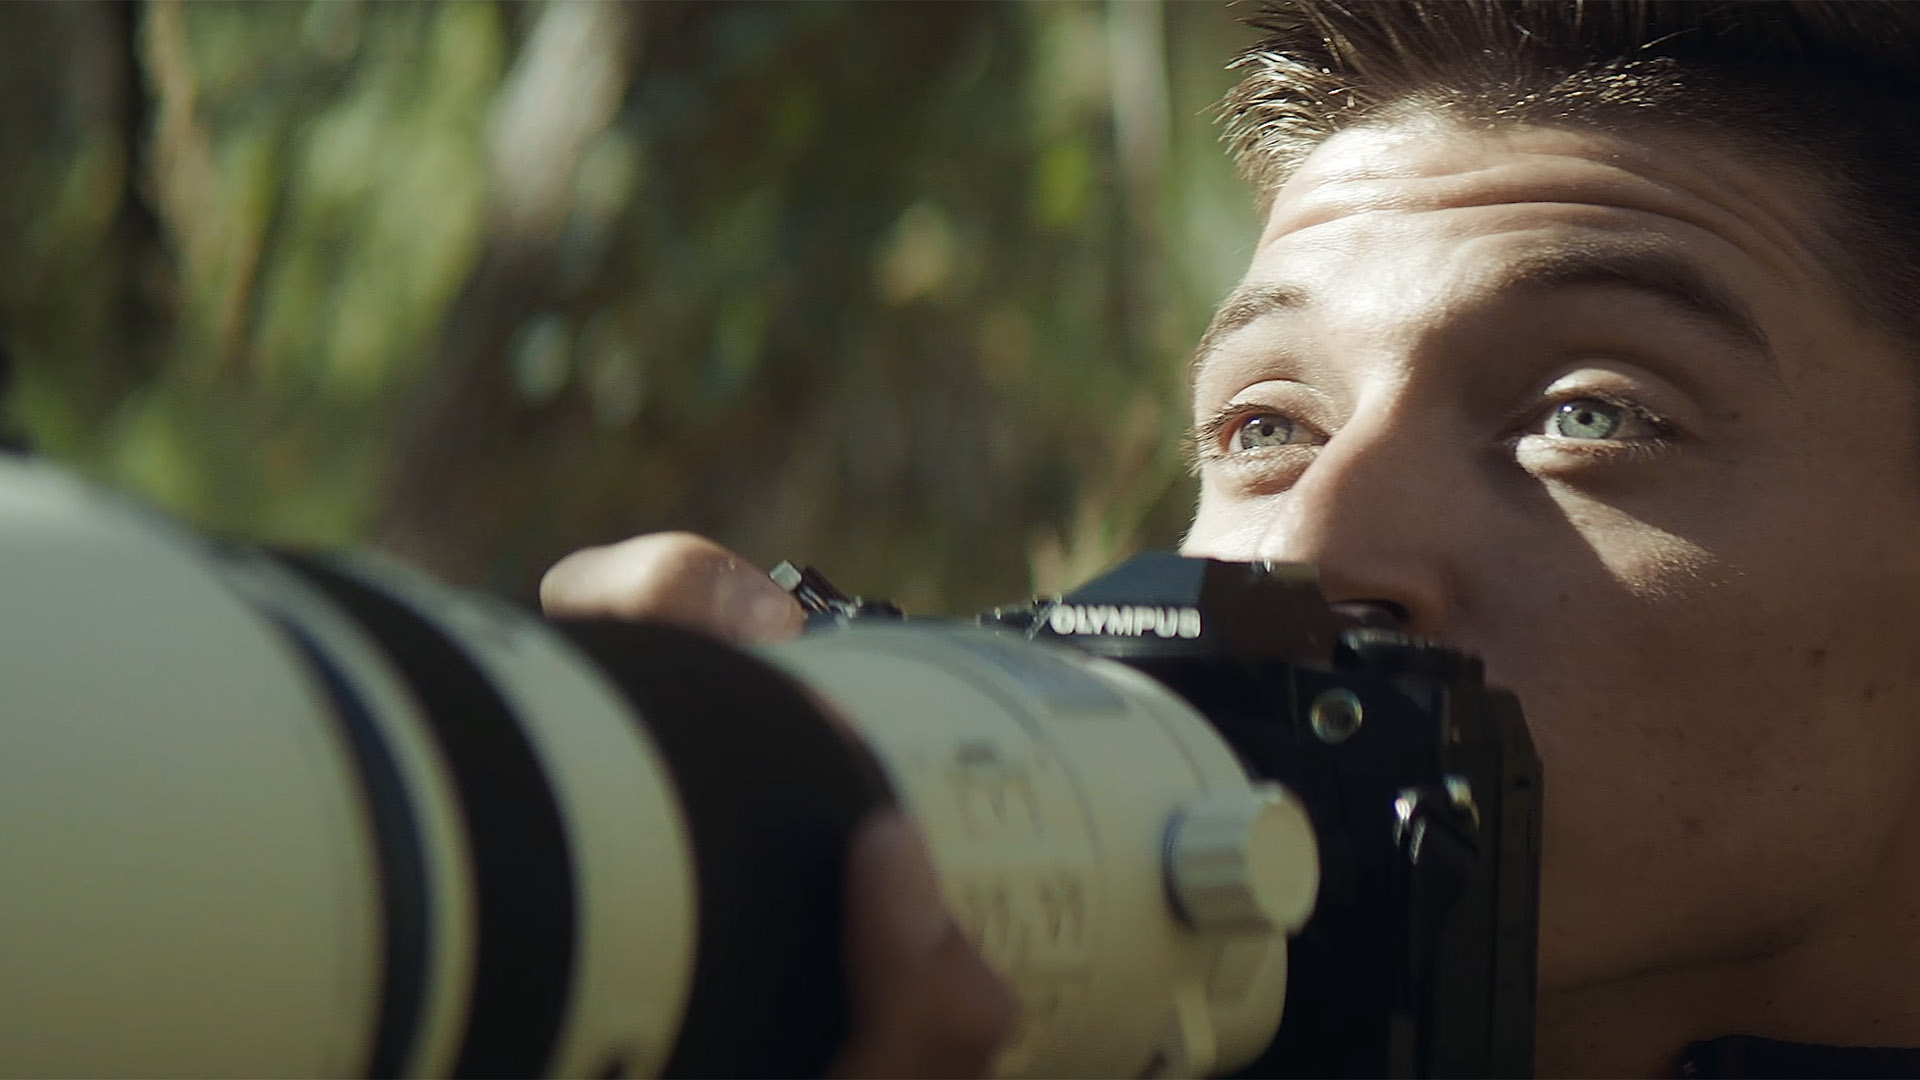 A man with blue eyes looks over his Olympus camera and telephoto lens.